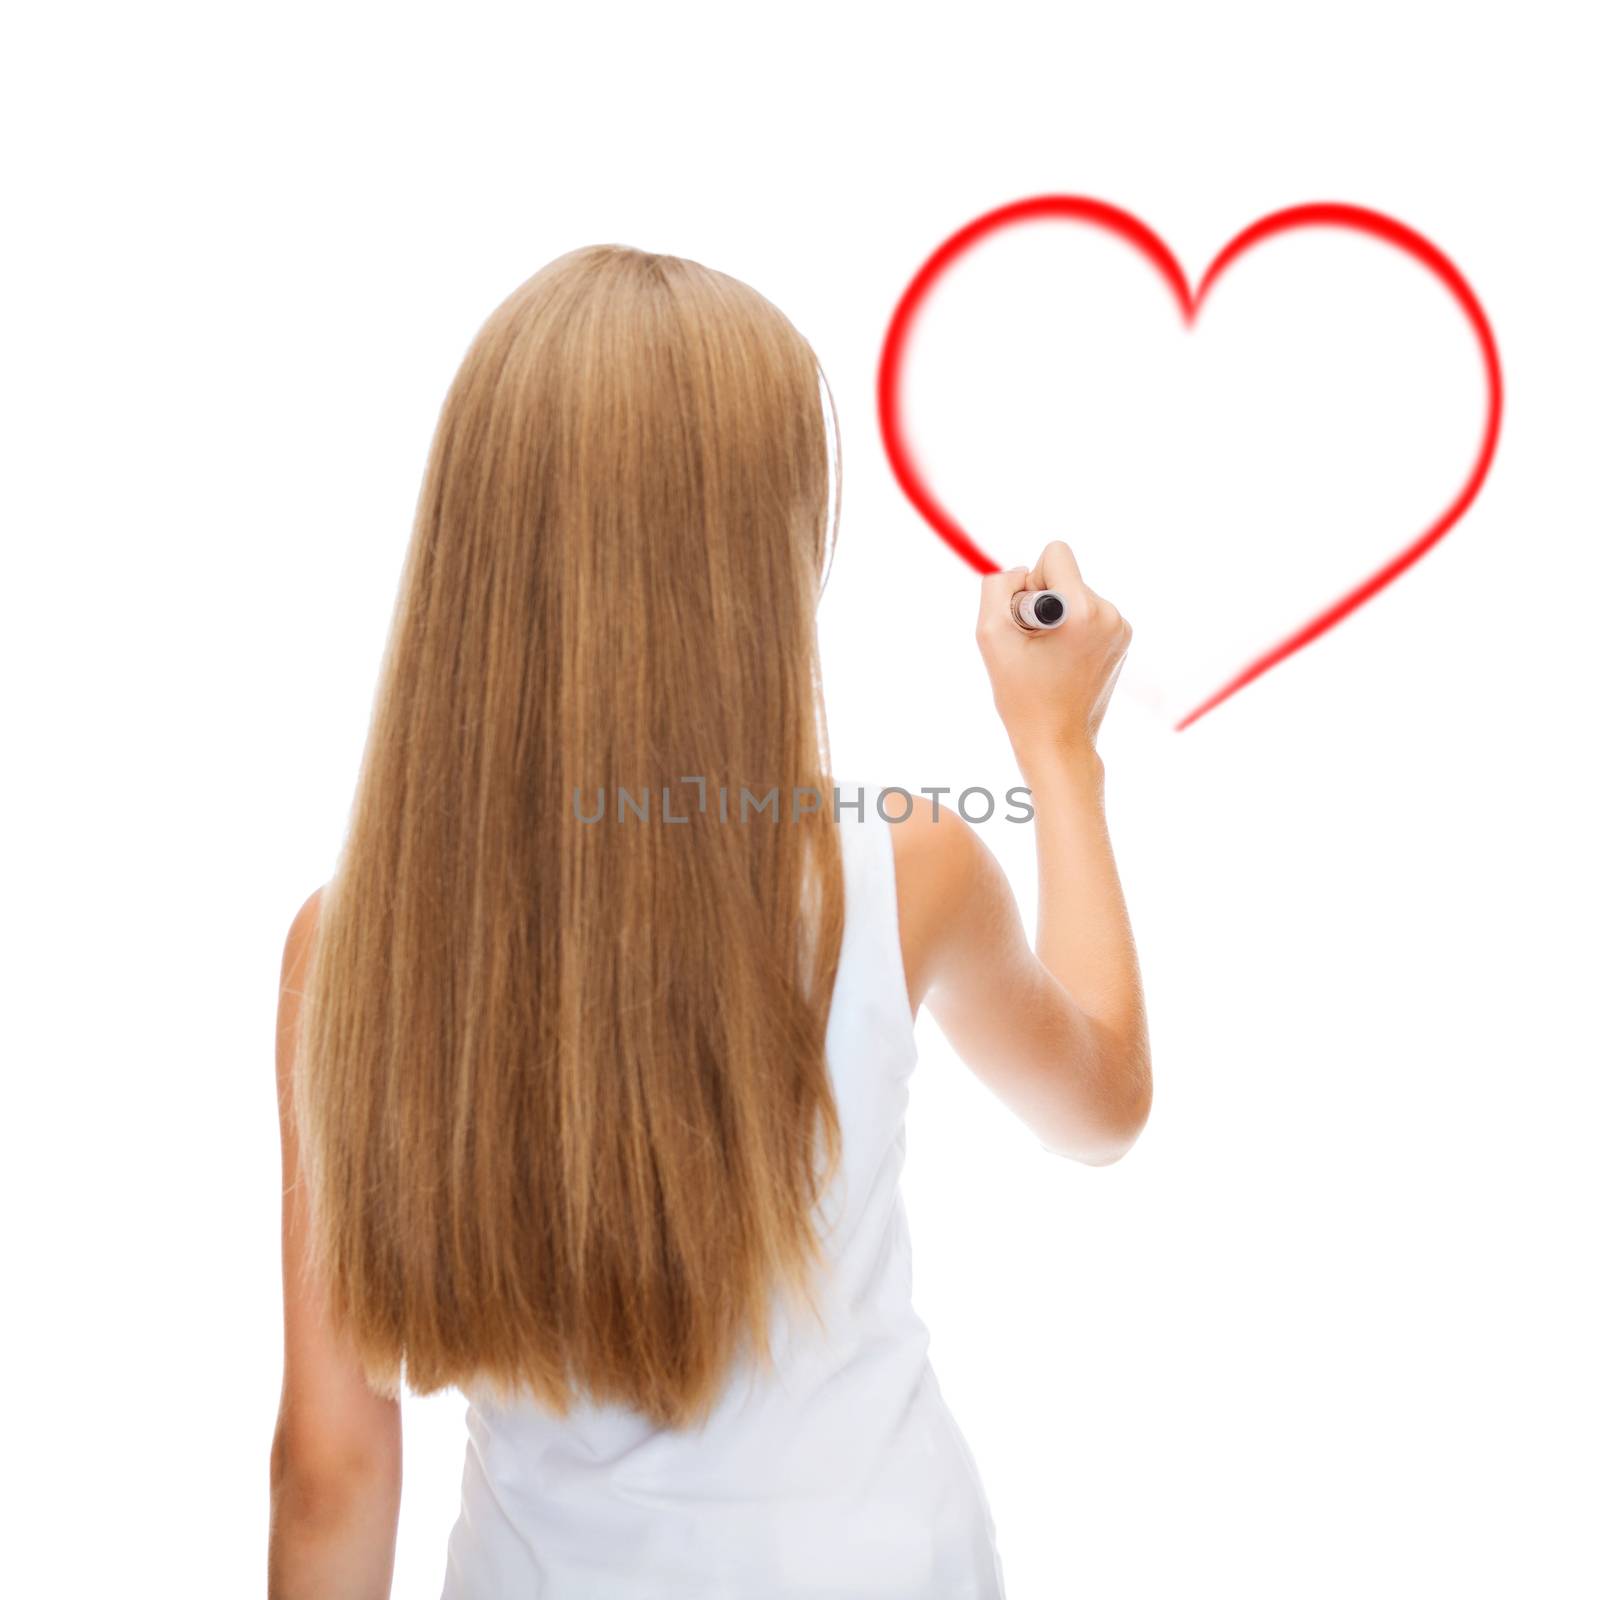 education, new technology and advertisement concept - teenage girl in white shirt from the back drawing heart on virtual screen